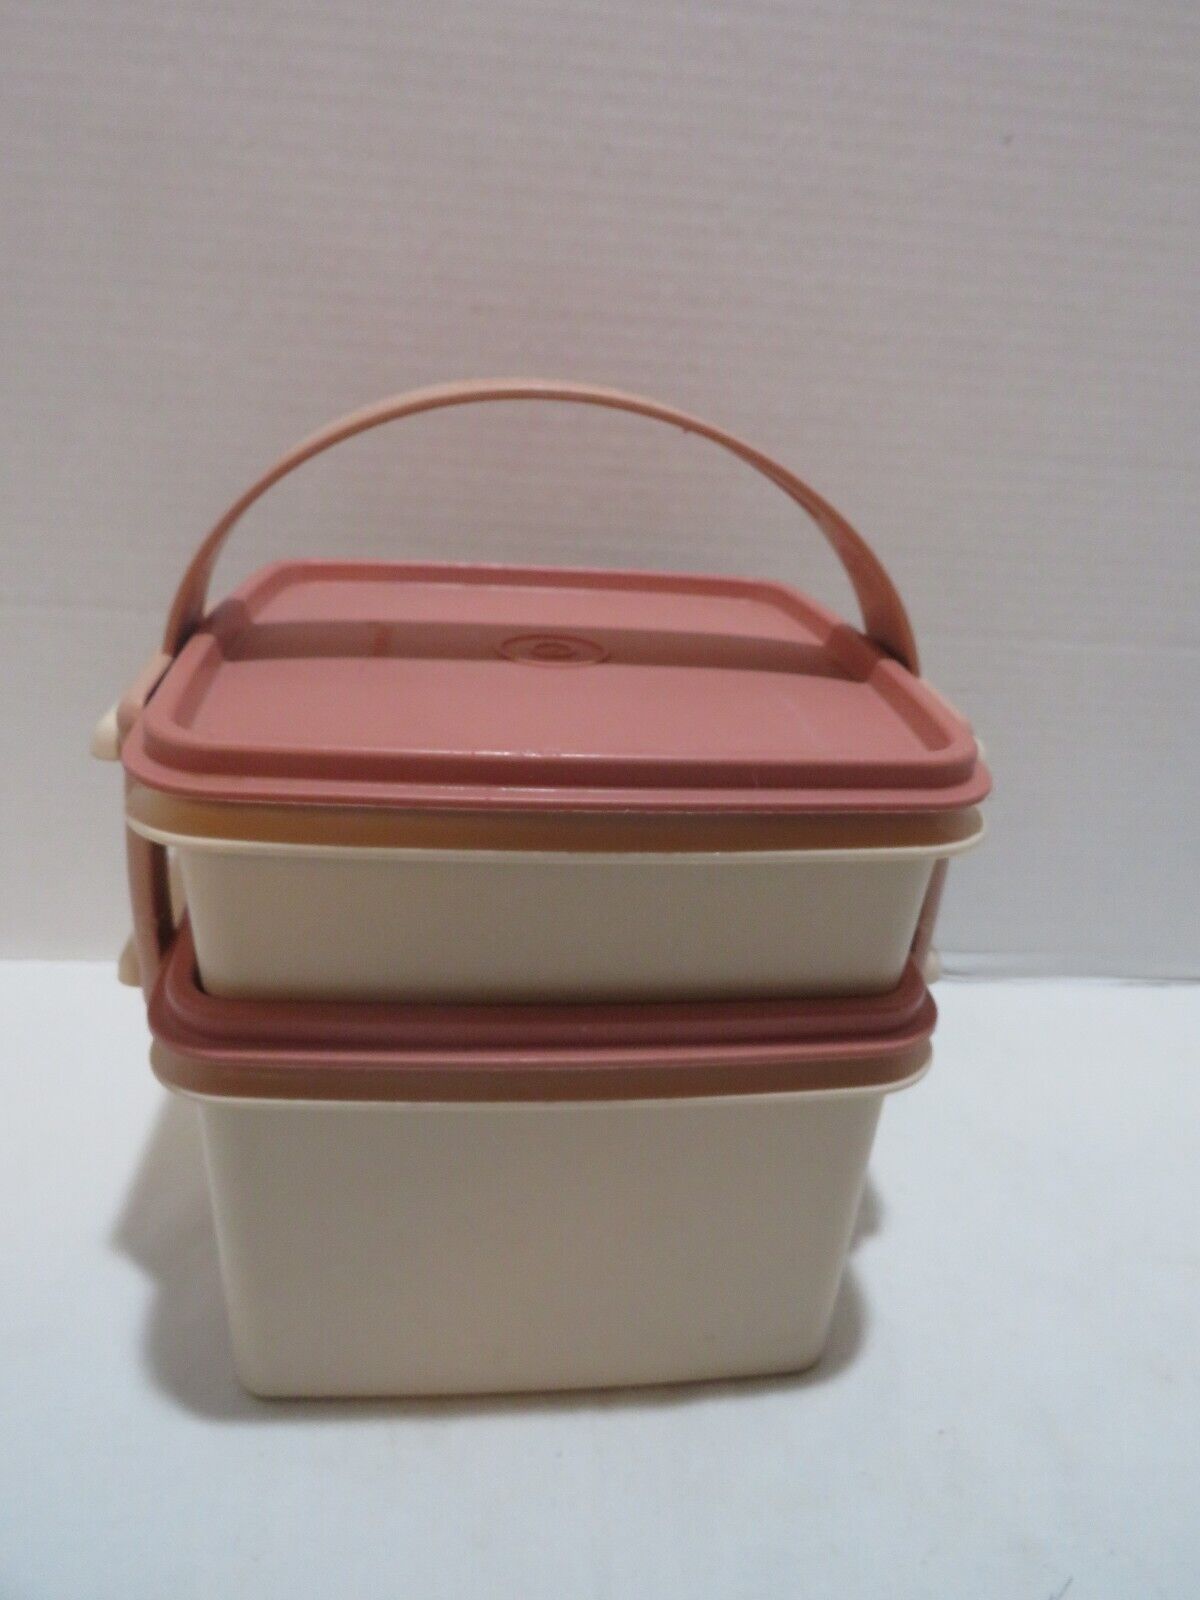 VTG TUPPERWARE LUNCH CONTAINER SET W/HANDLE & 2 CONTAINERS W/LIDS/ROSE